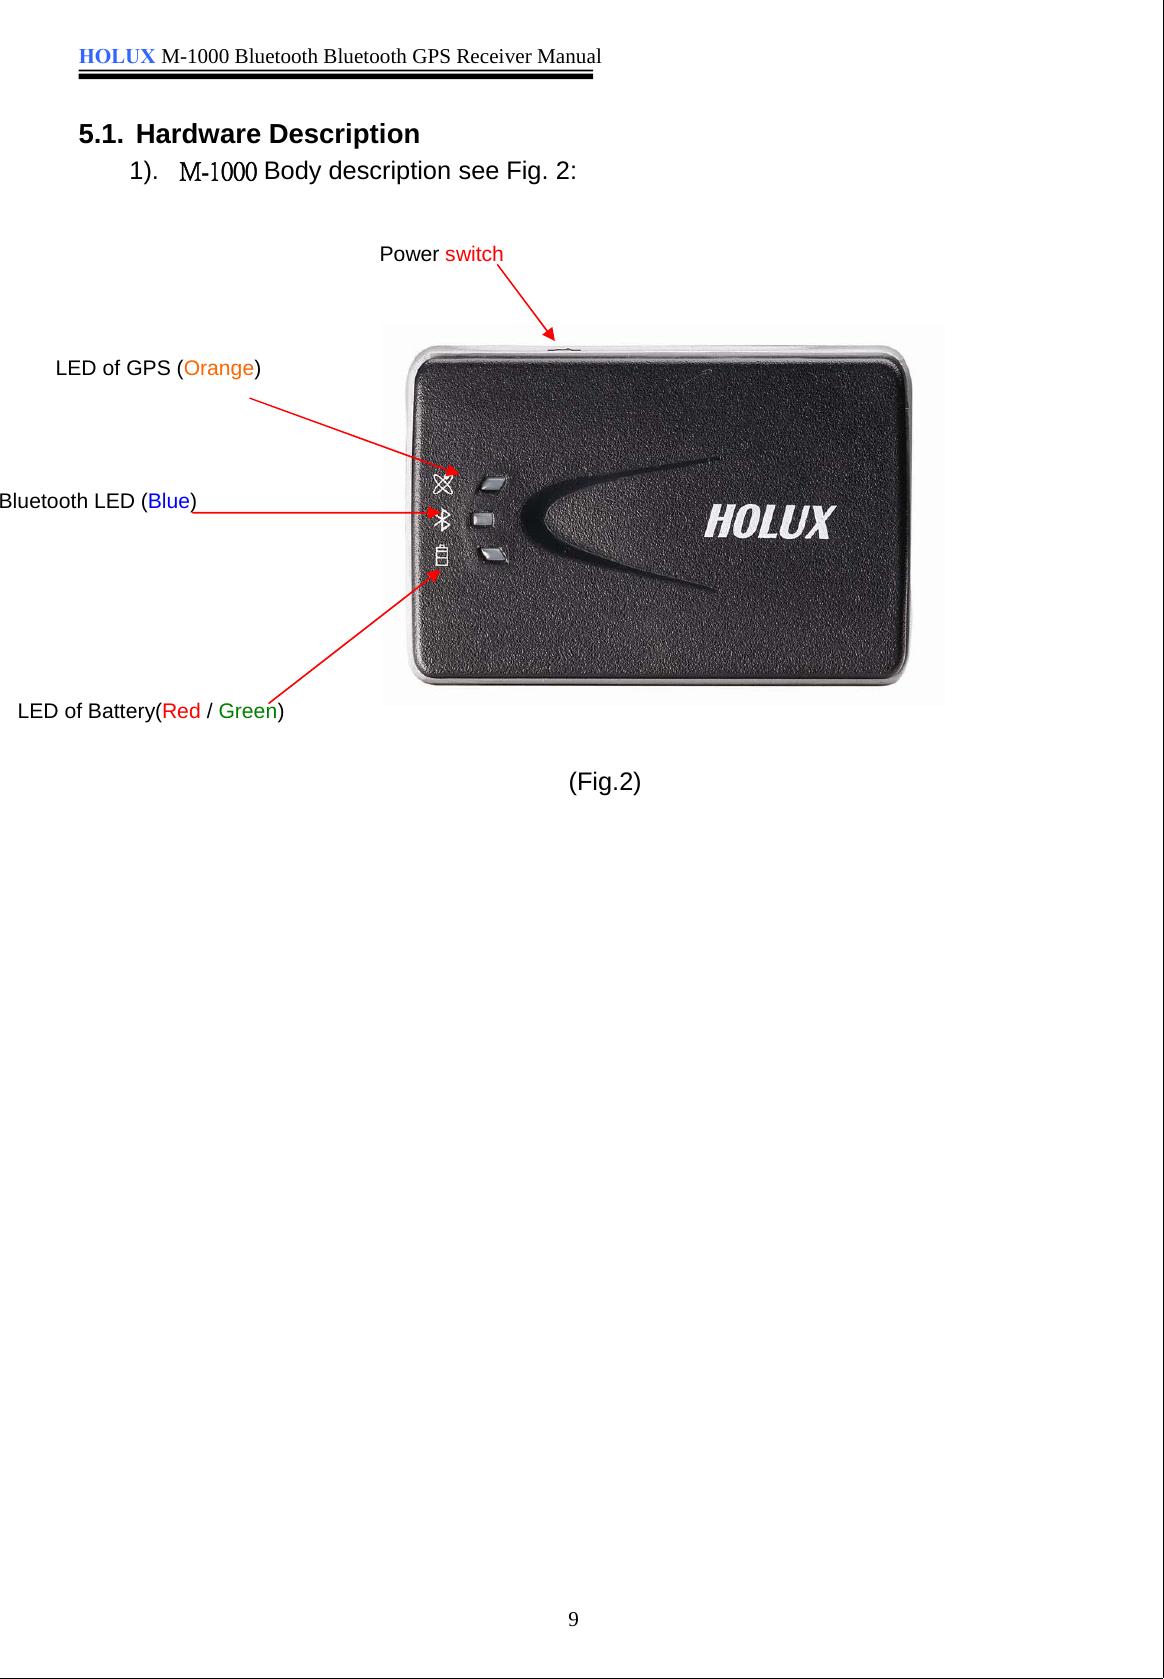 HOLUX M-1000 Bluetooth Bluetooth GPS Receiver Manual95.1. Hardware Description1).  Body description see Fig. 2:(Fig.2)LED of Battery(Red /Green)Bluetooth LED (Blue)LED of GPS (Orange)Power switch